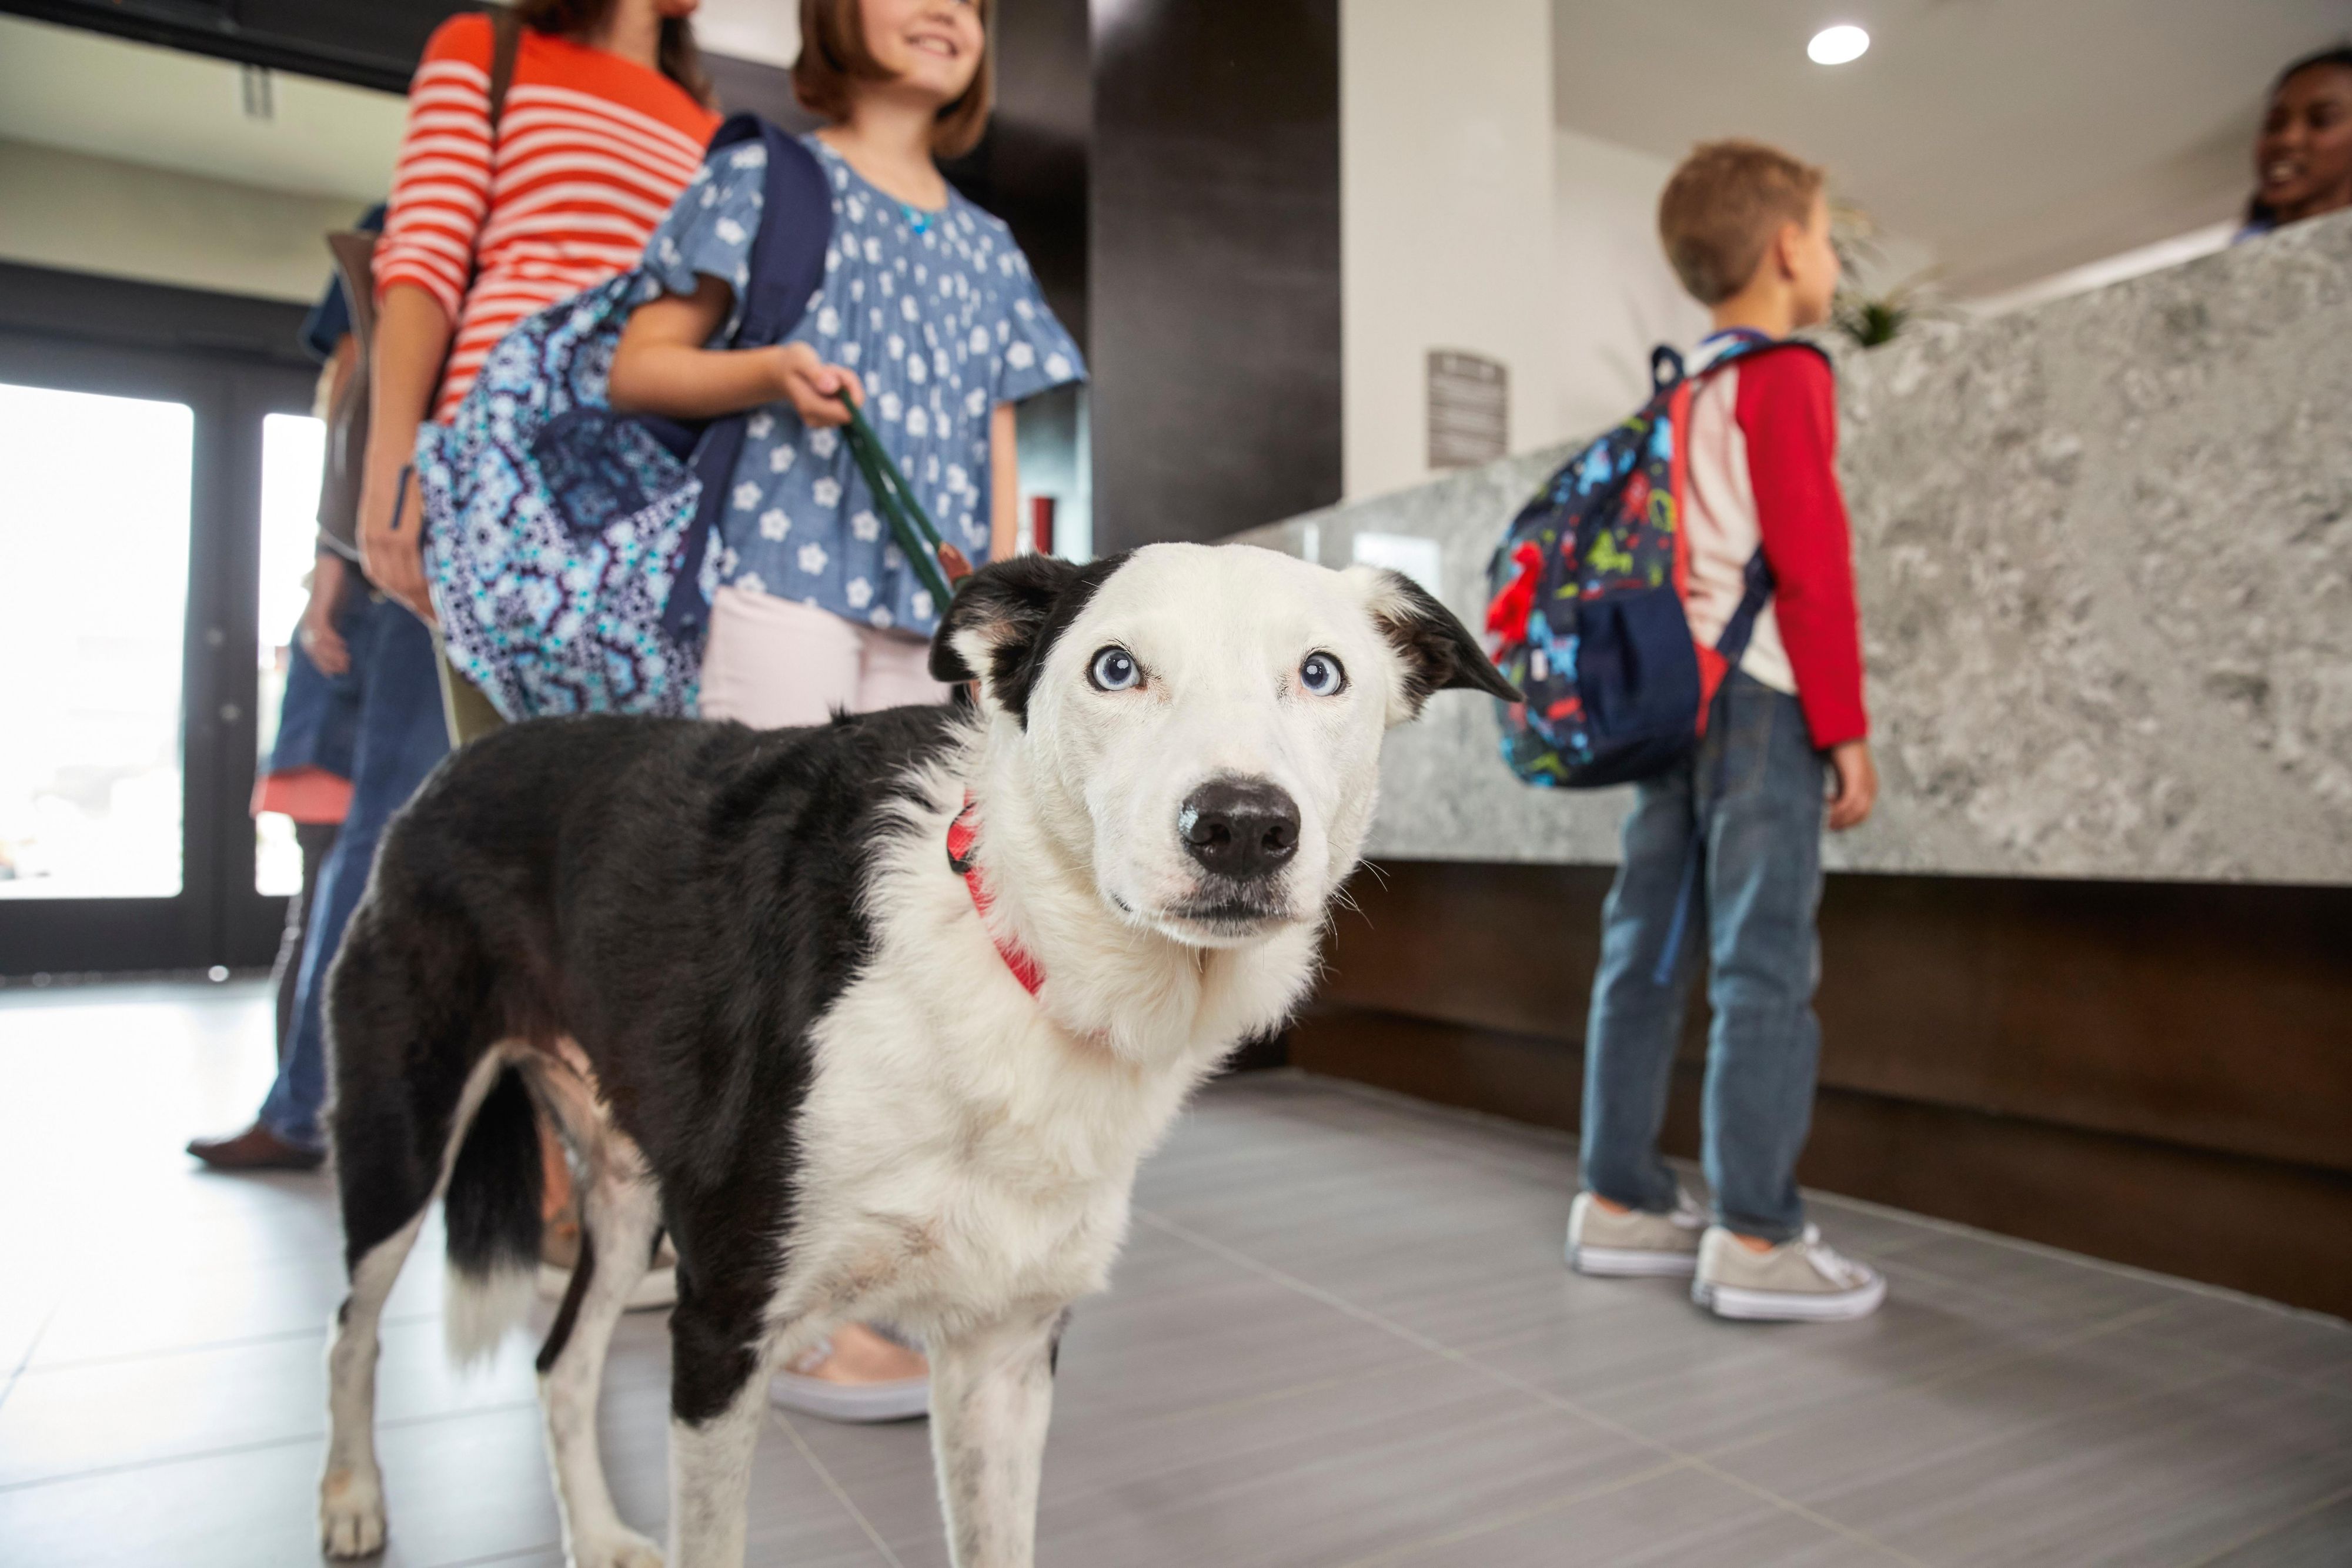 Your furry friends are welcome here too. Fees and restrictions apply. Please contact the front desk for our pet policies and to have them add your pet to your reservation.